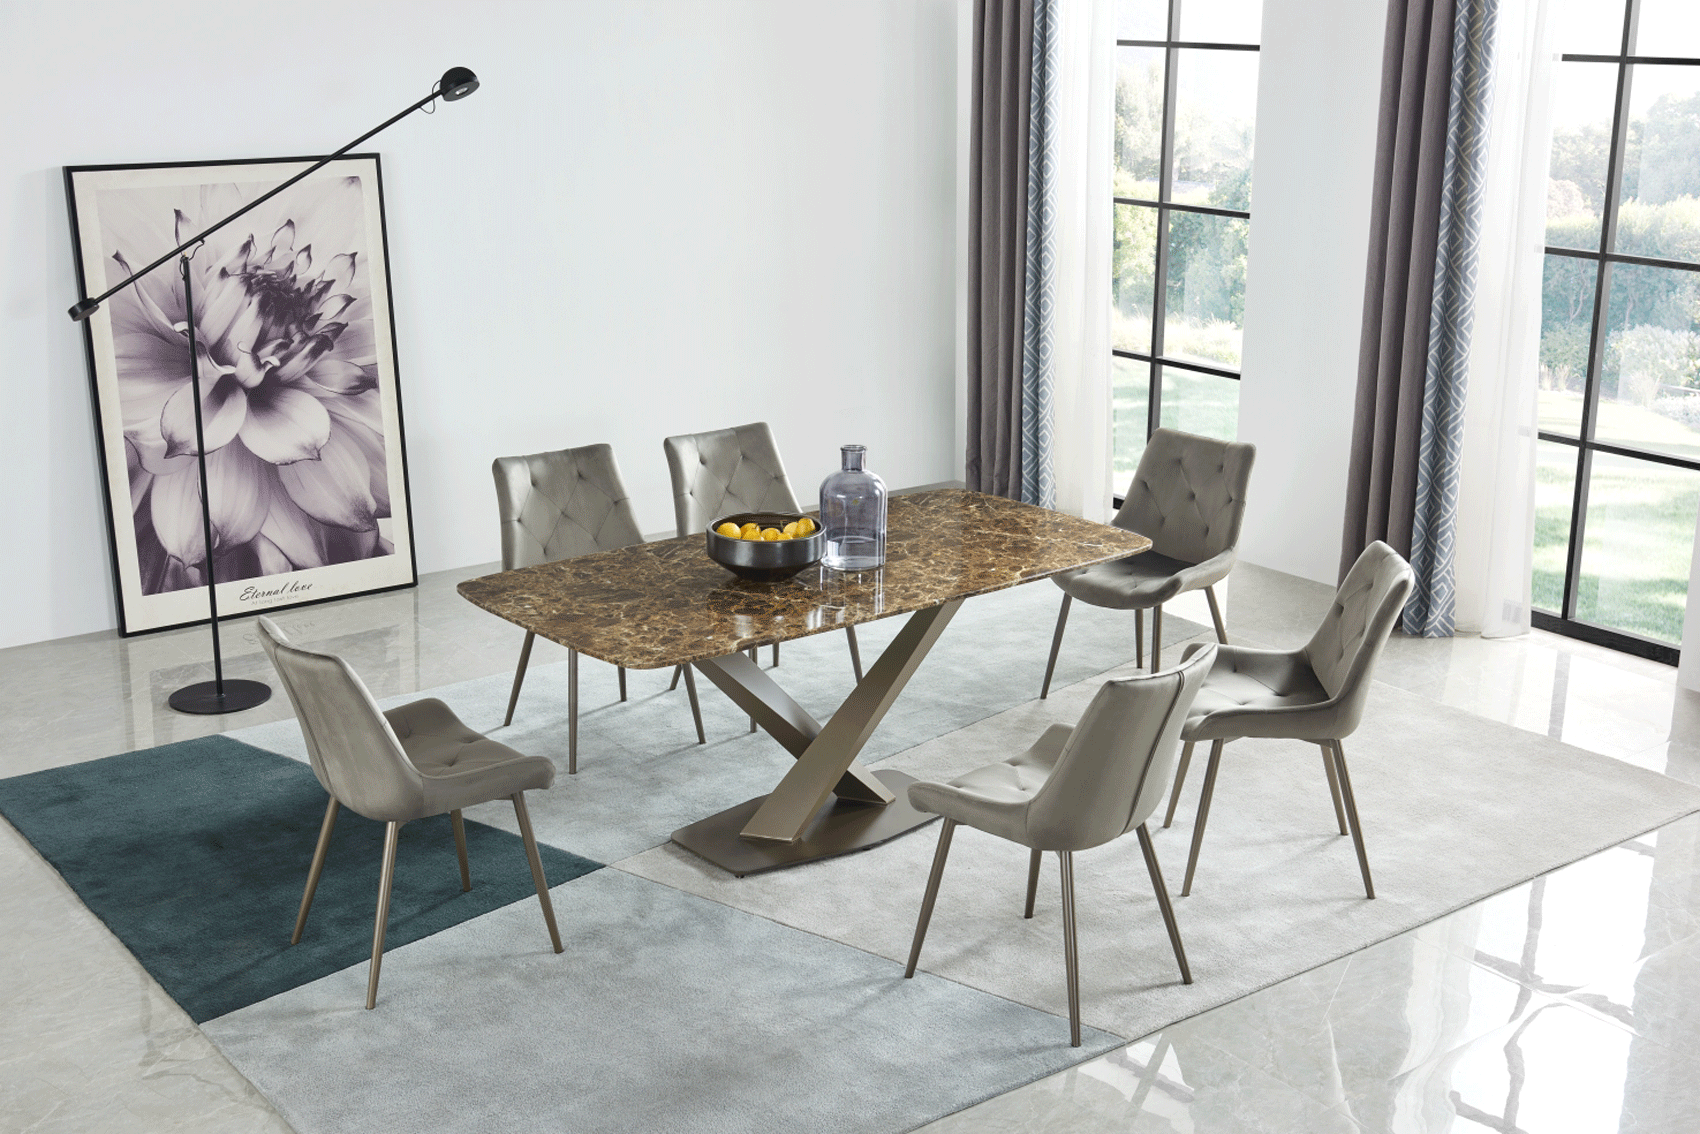 Dining Room Furniture Kitchen Tables and Chairs Sets 311 Marble Dining Table with 137 Chairs